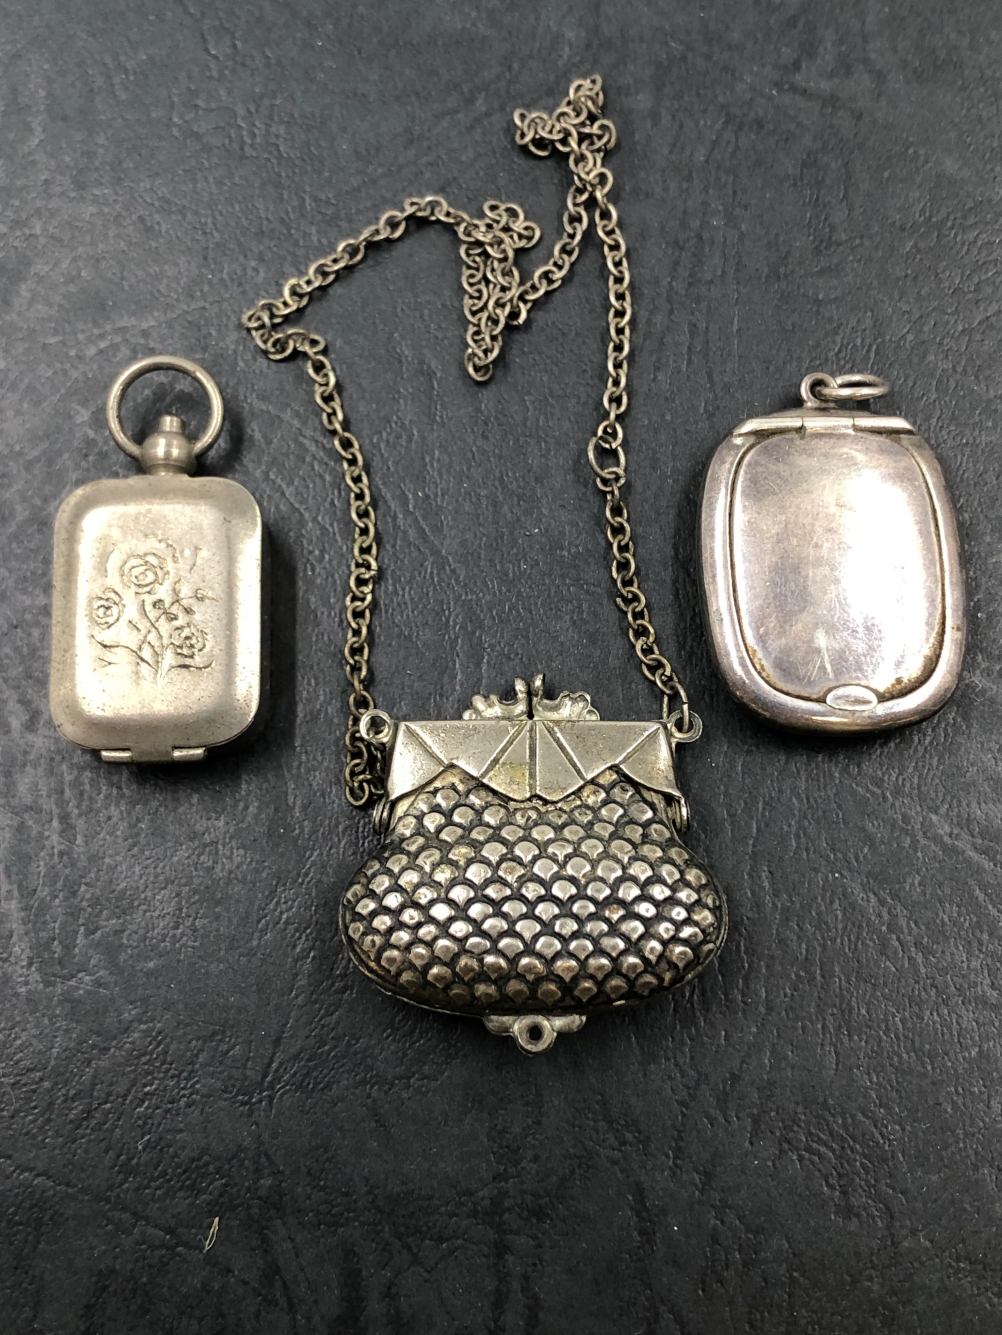 A HALLMARKED SILVER SNUFF BOX WITH SUSPENSION RING, A NICKEL PURSE WITH CHAIN, AND A NICKEL MONOGRAM